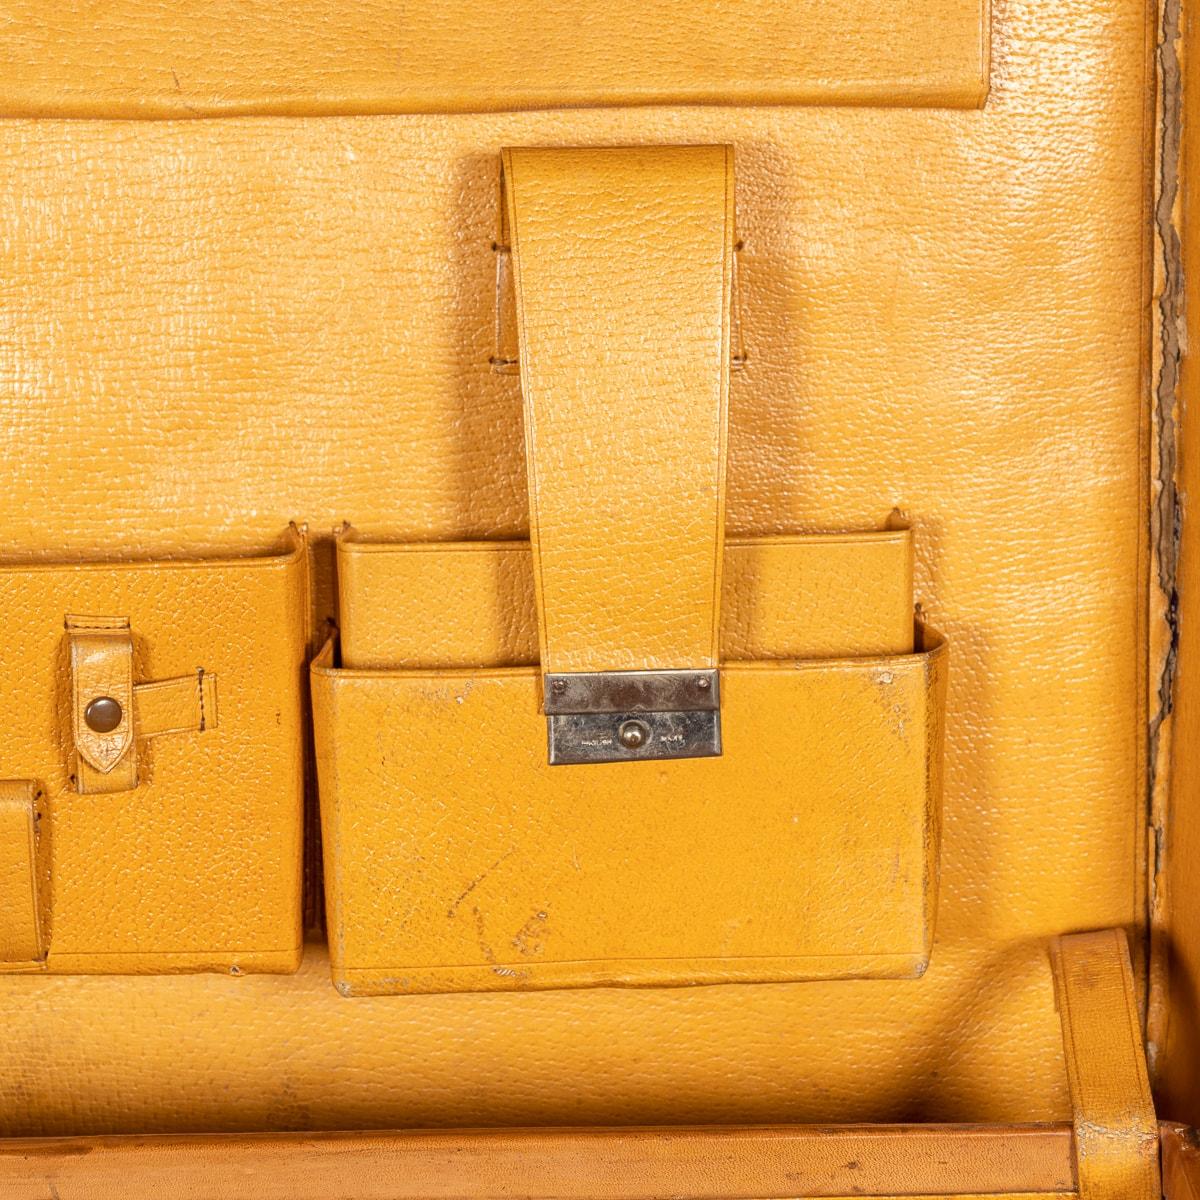 20th Century British Made Bridle Leather Suitcase, c.1910 For Sale 8